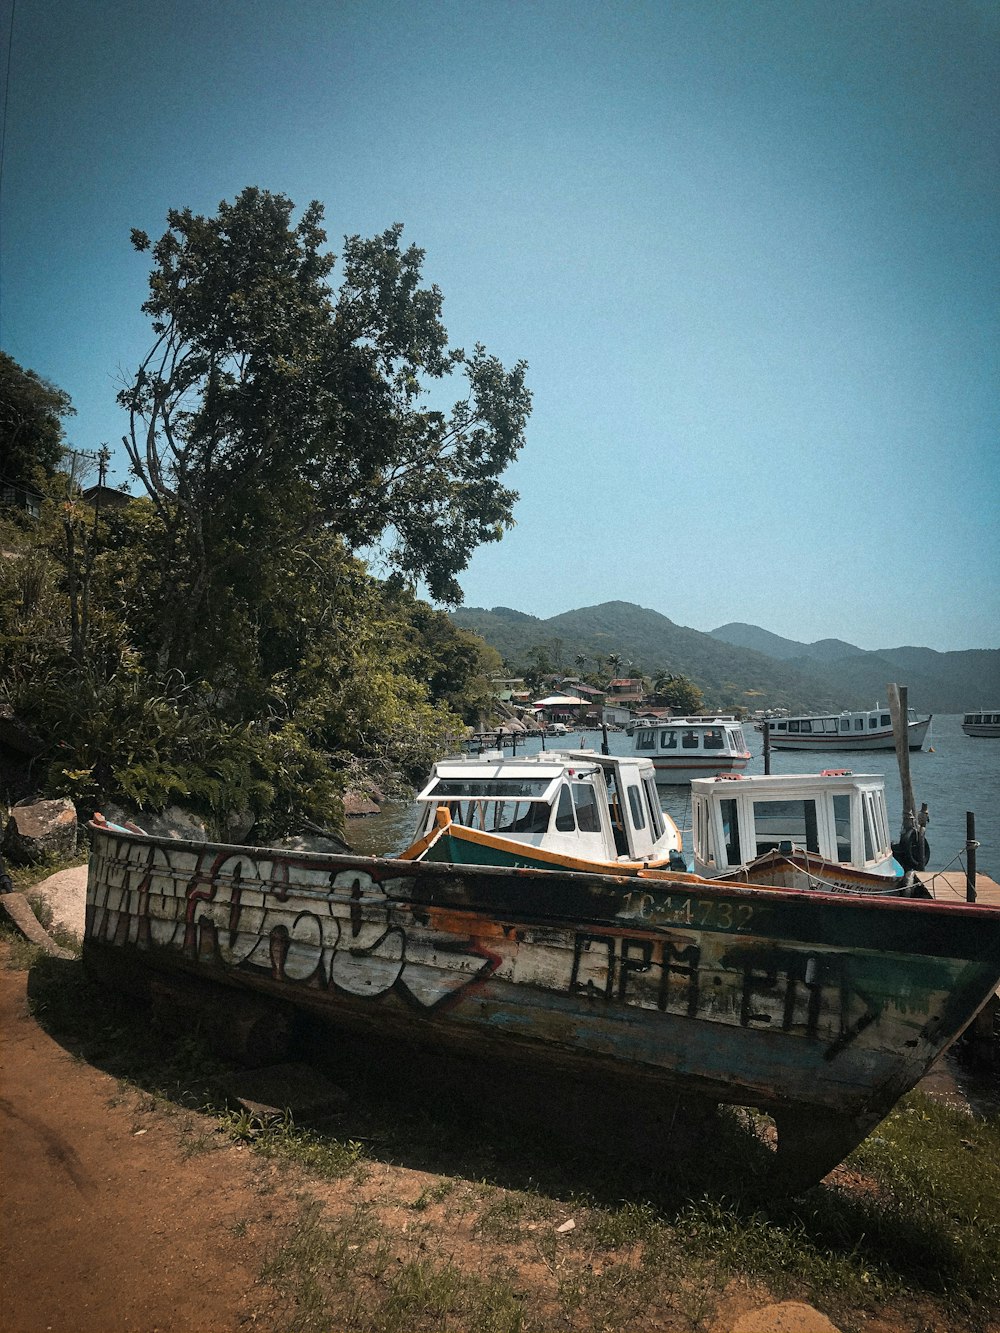 brown and white boat on brown sand near green trees during daytime